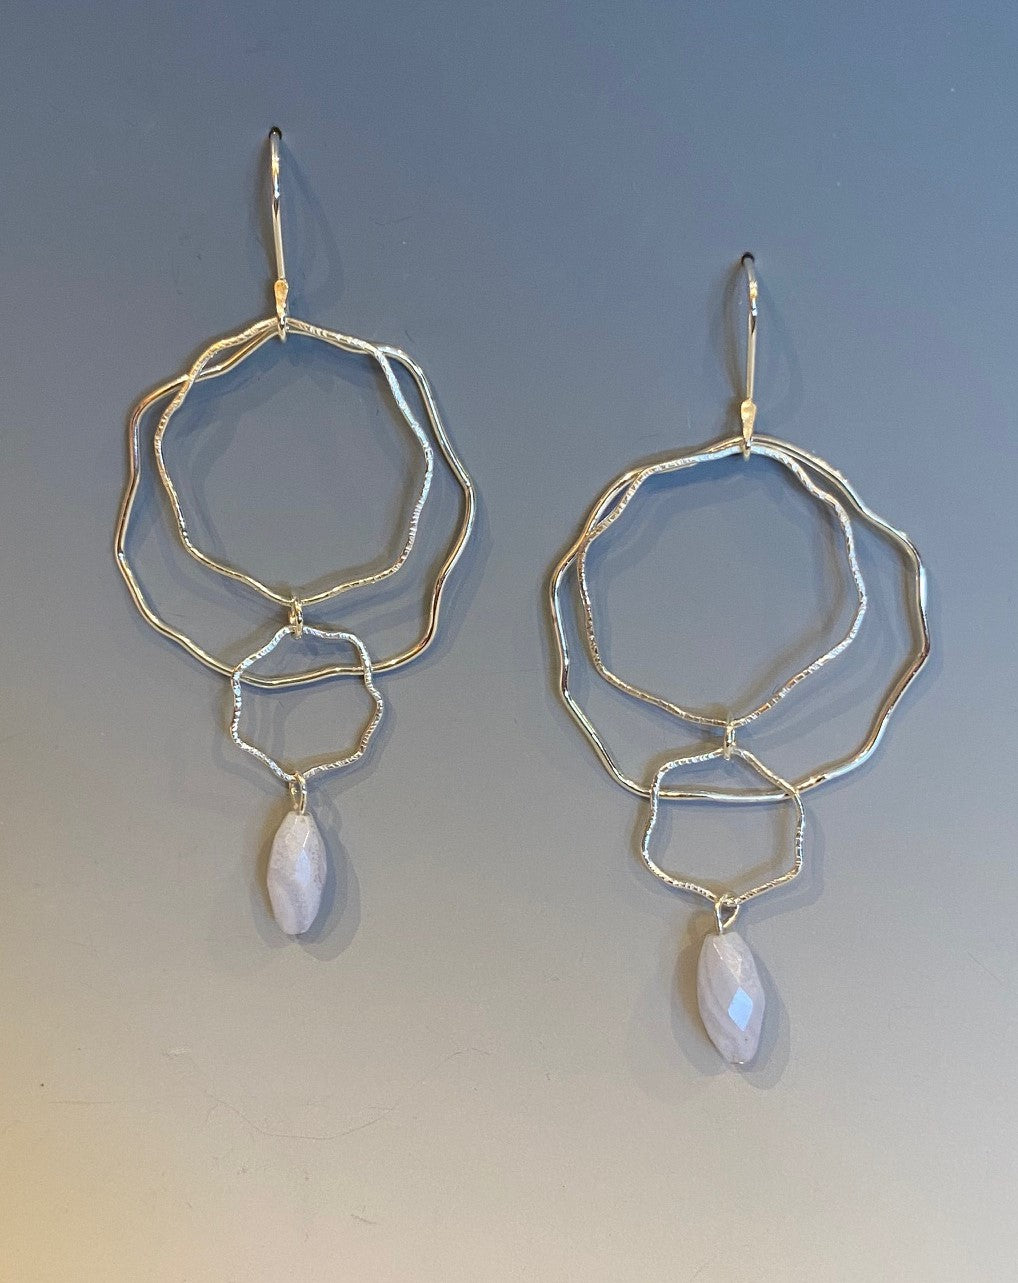 "Blue Lace Agate Blossom" Earrings